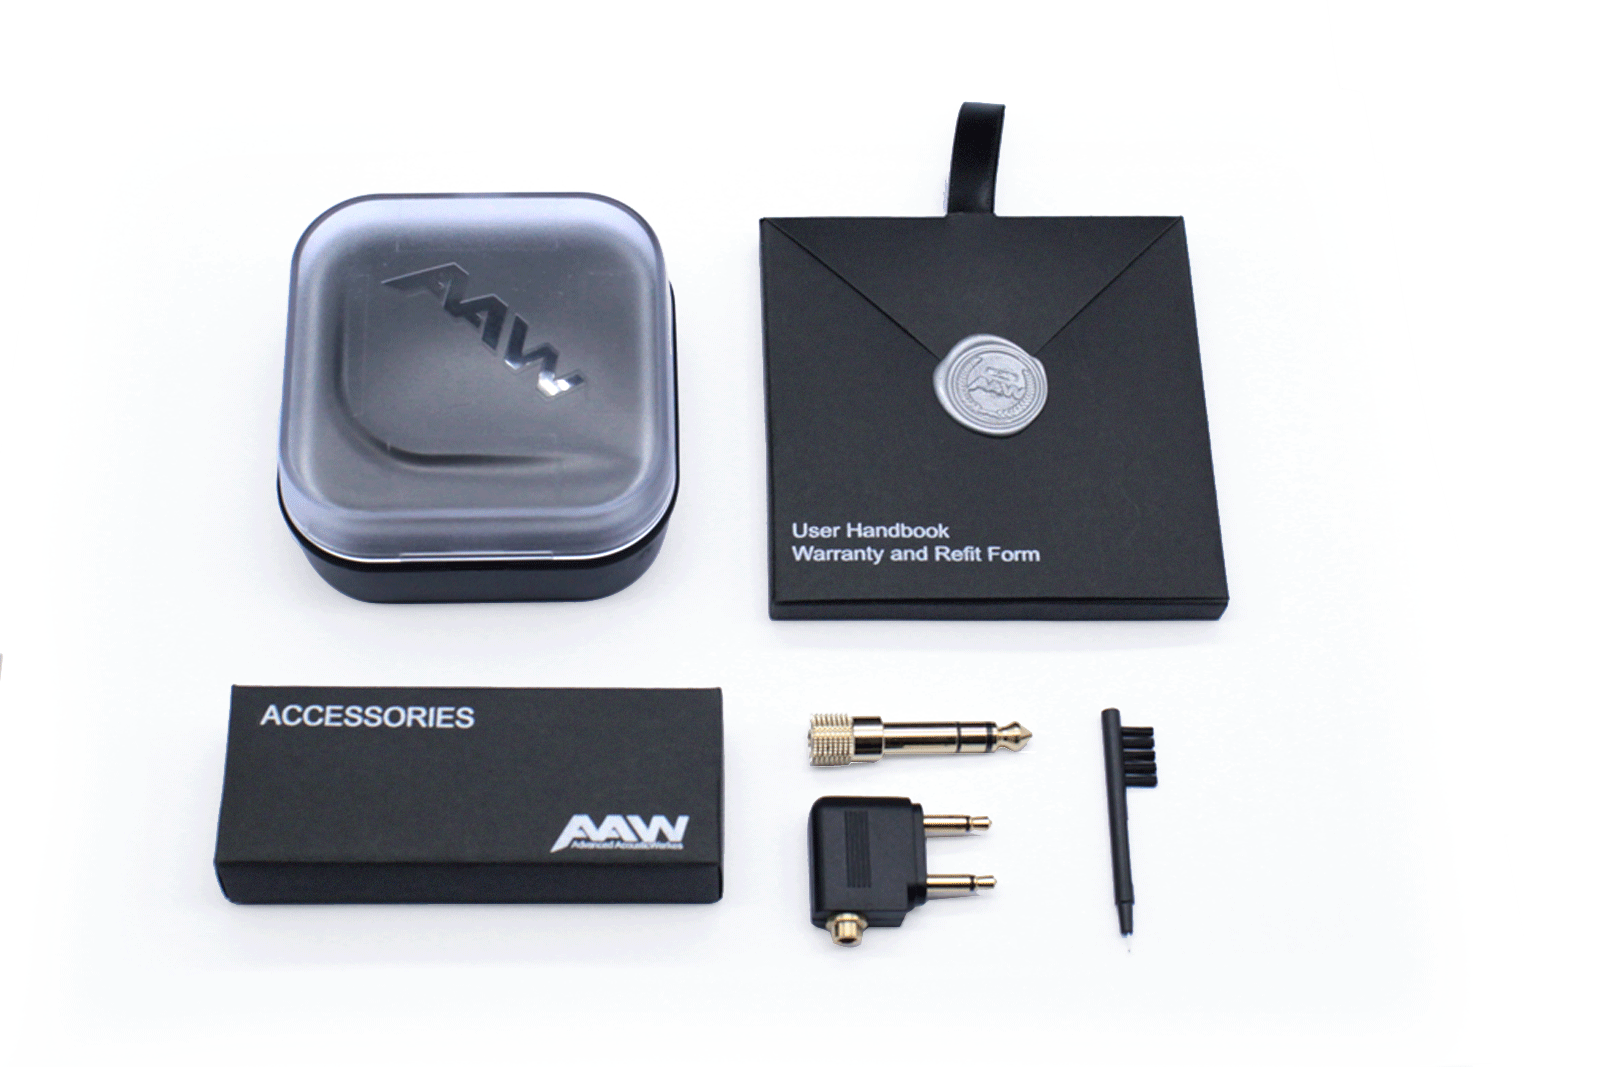 AAW A1D Universal In-ear Monitor đóng hộp 